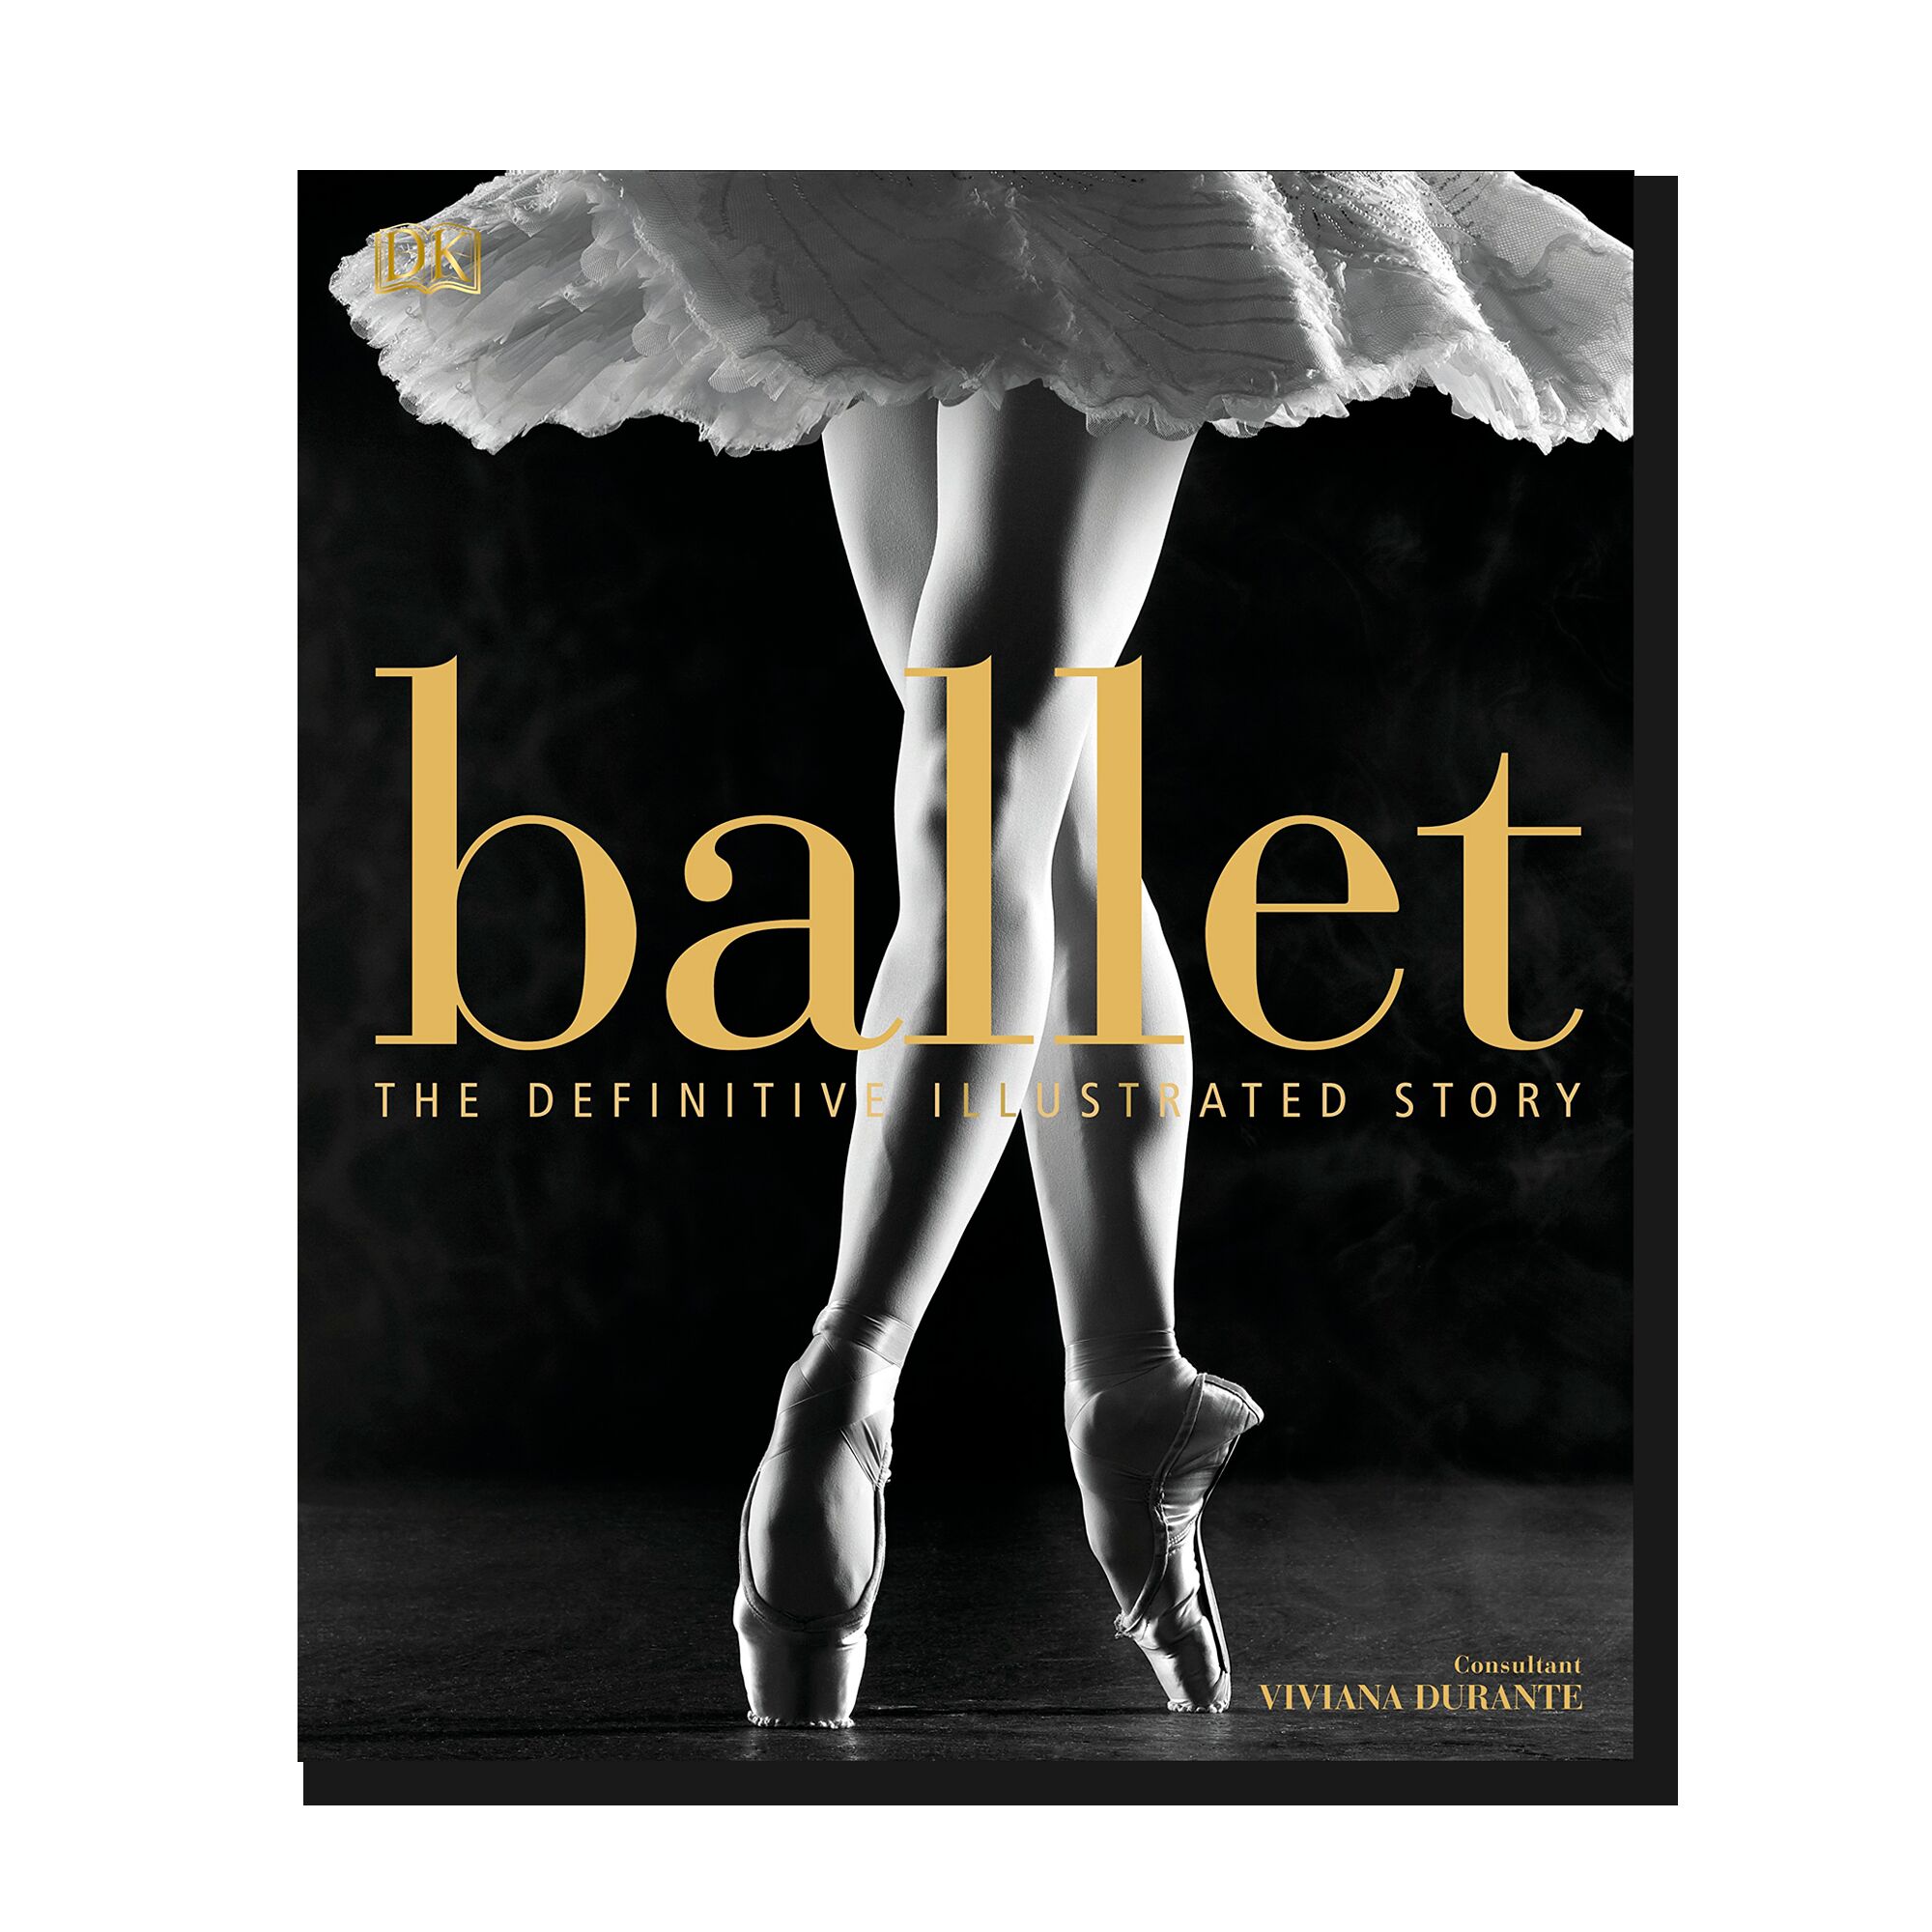 Ballet: The Definitive Illustrated Story